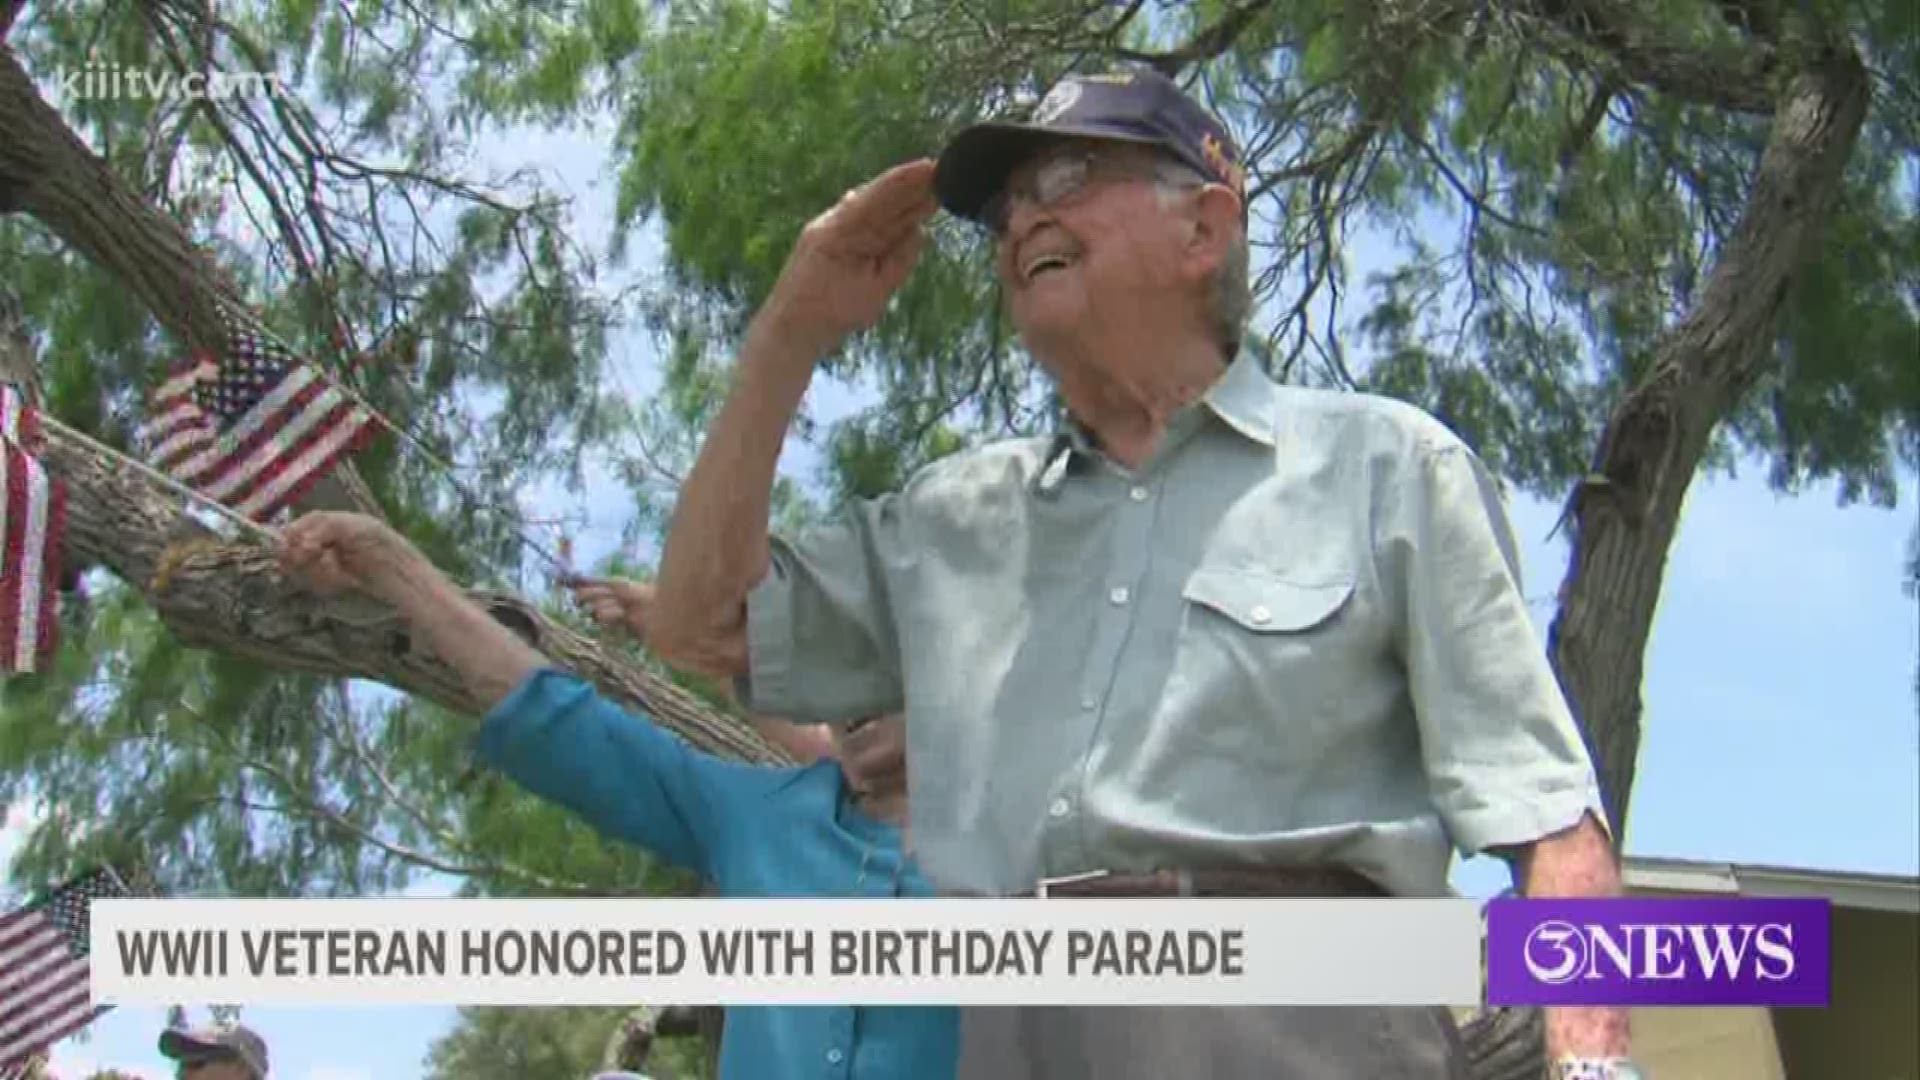 The USS Lexington Museum organized a parade for retired Navy Captain Bob Patterson's 99 birthday.